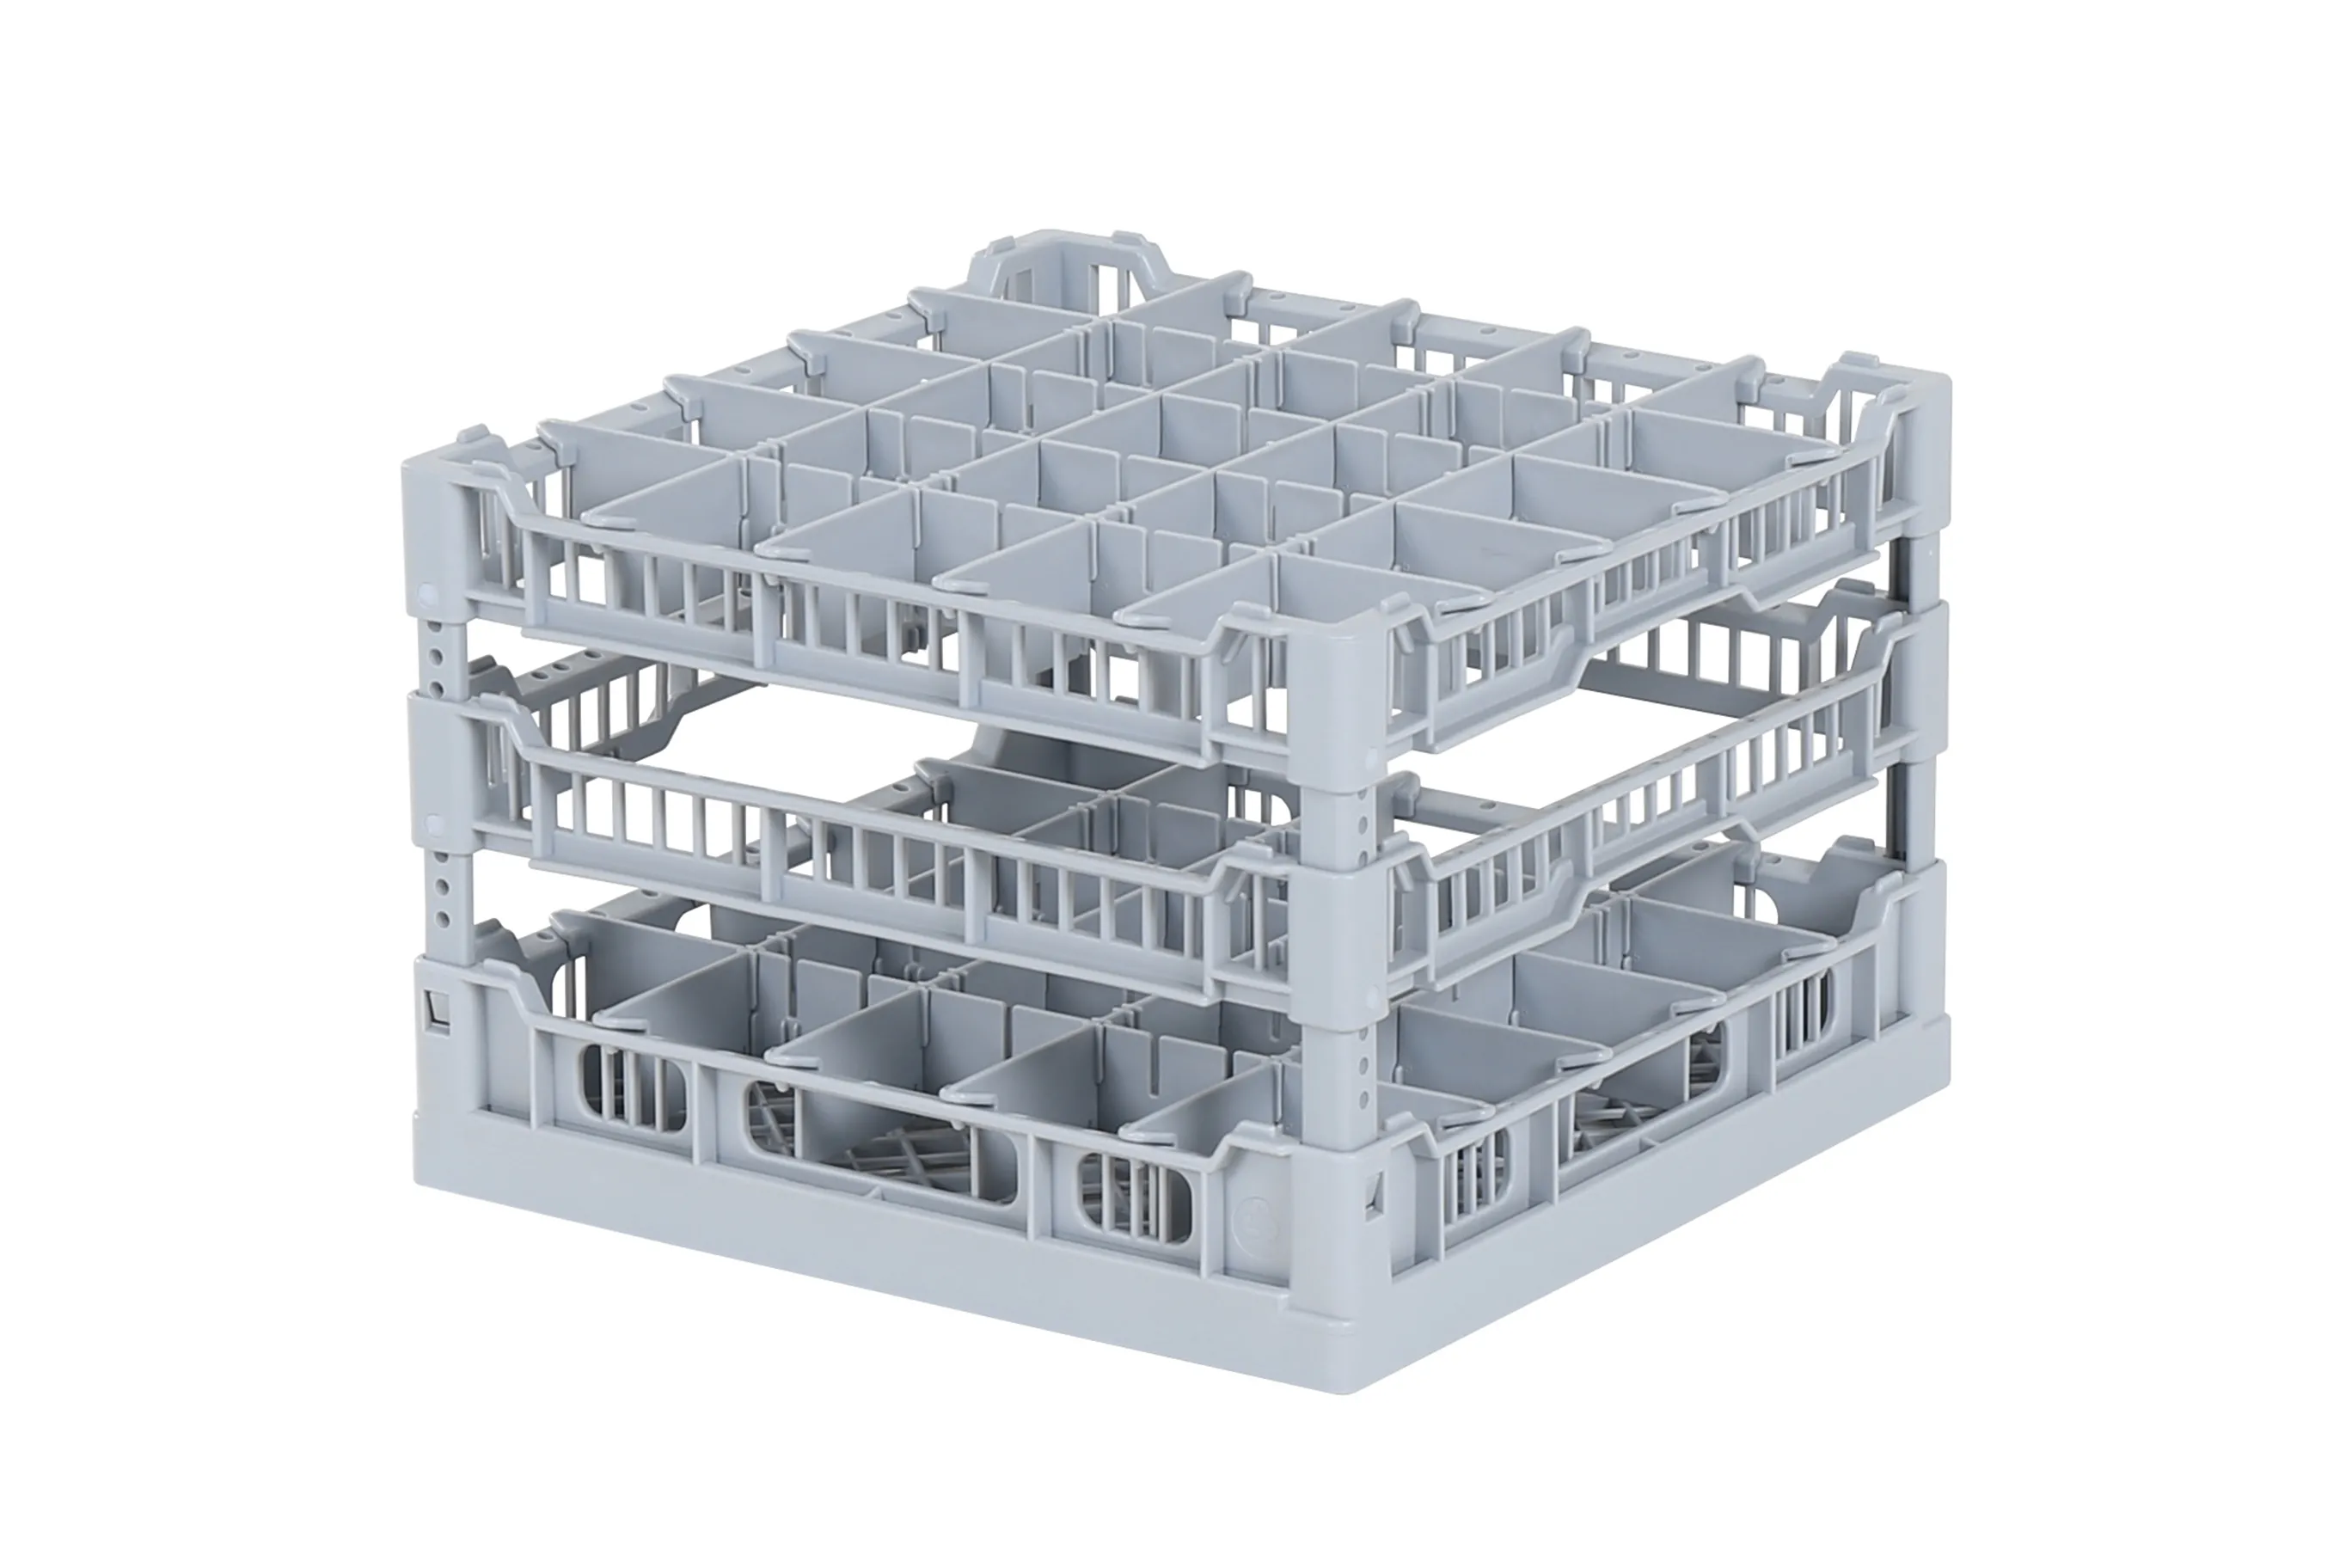 Dishwasher basket 400 x 400 mm - for glass heights from 191 to 240 mm - with 5 x 5 compartmentalization - maximum glass diameter 68mm